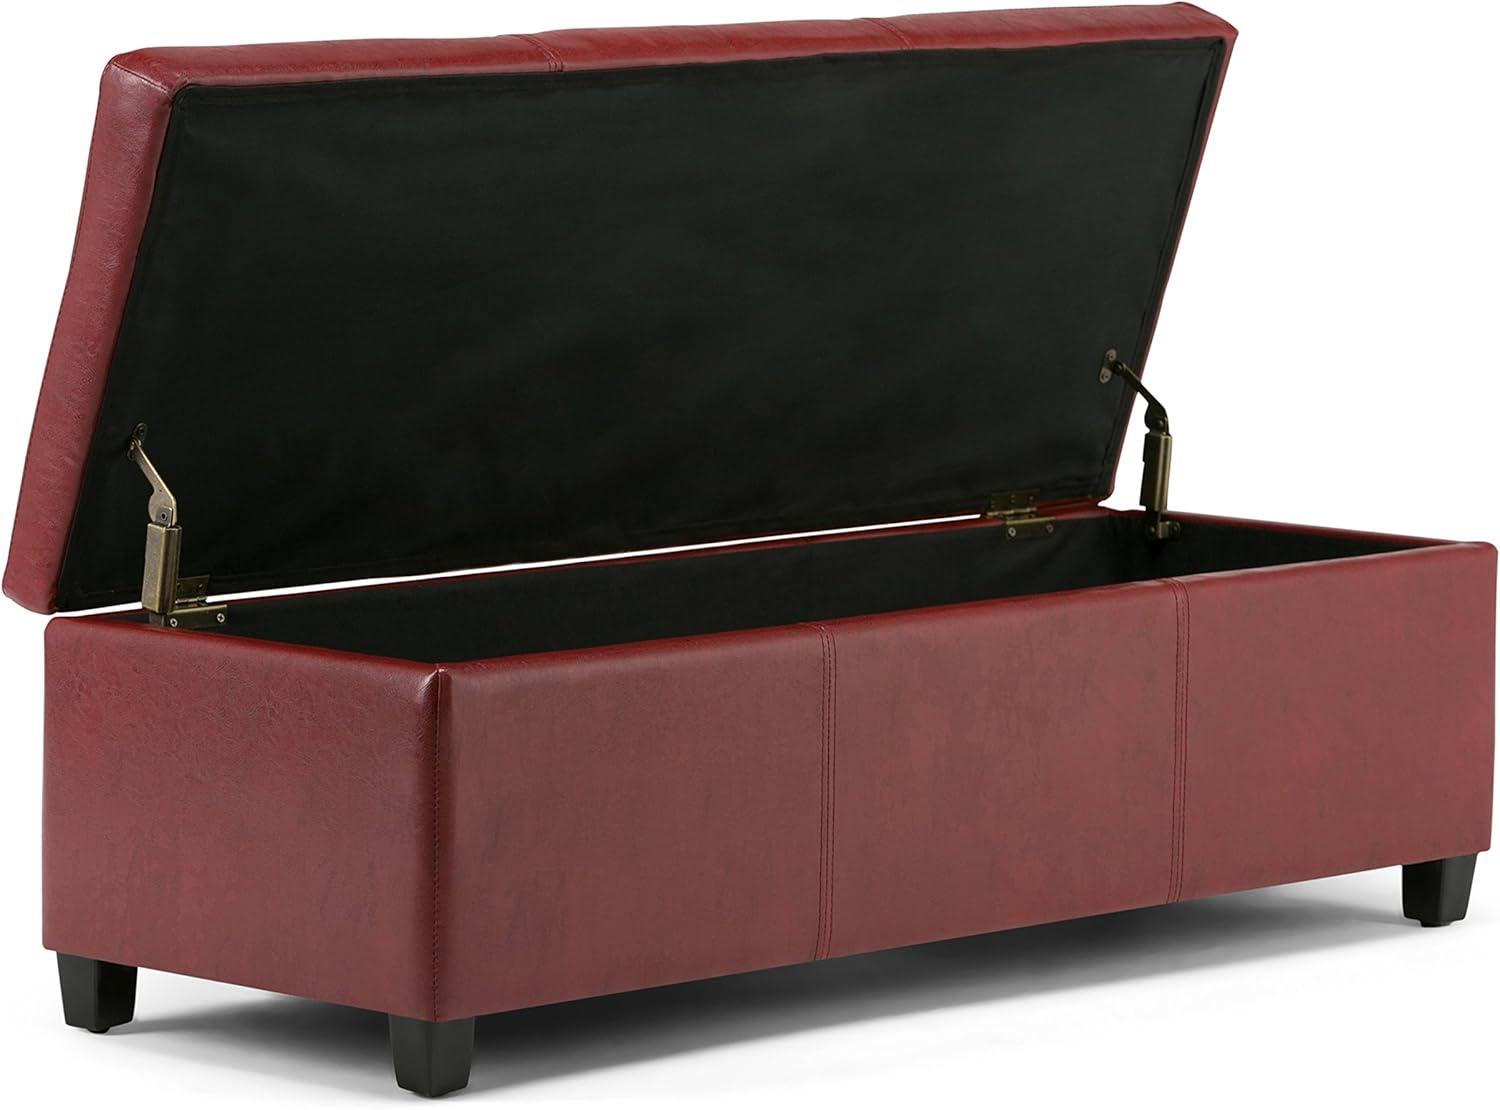 Avalon Red Faux Leather 48" Rectangular Storage Ottoman Bench